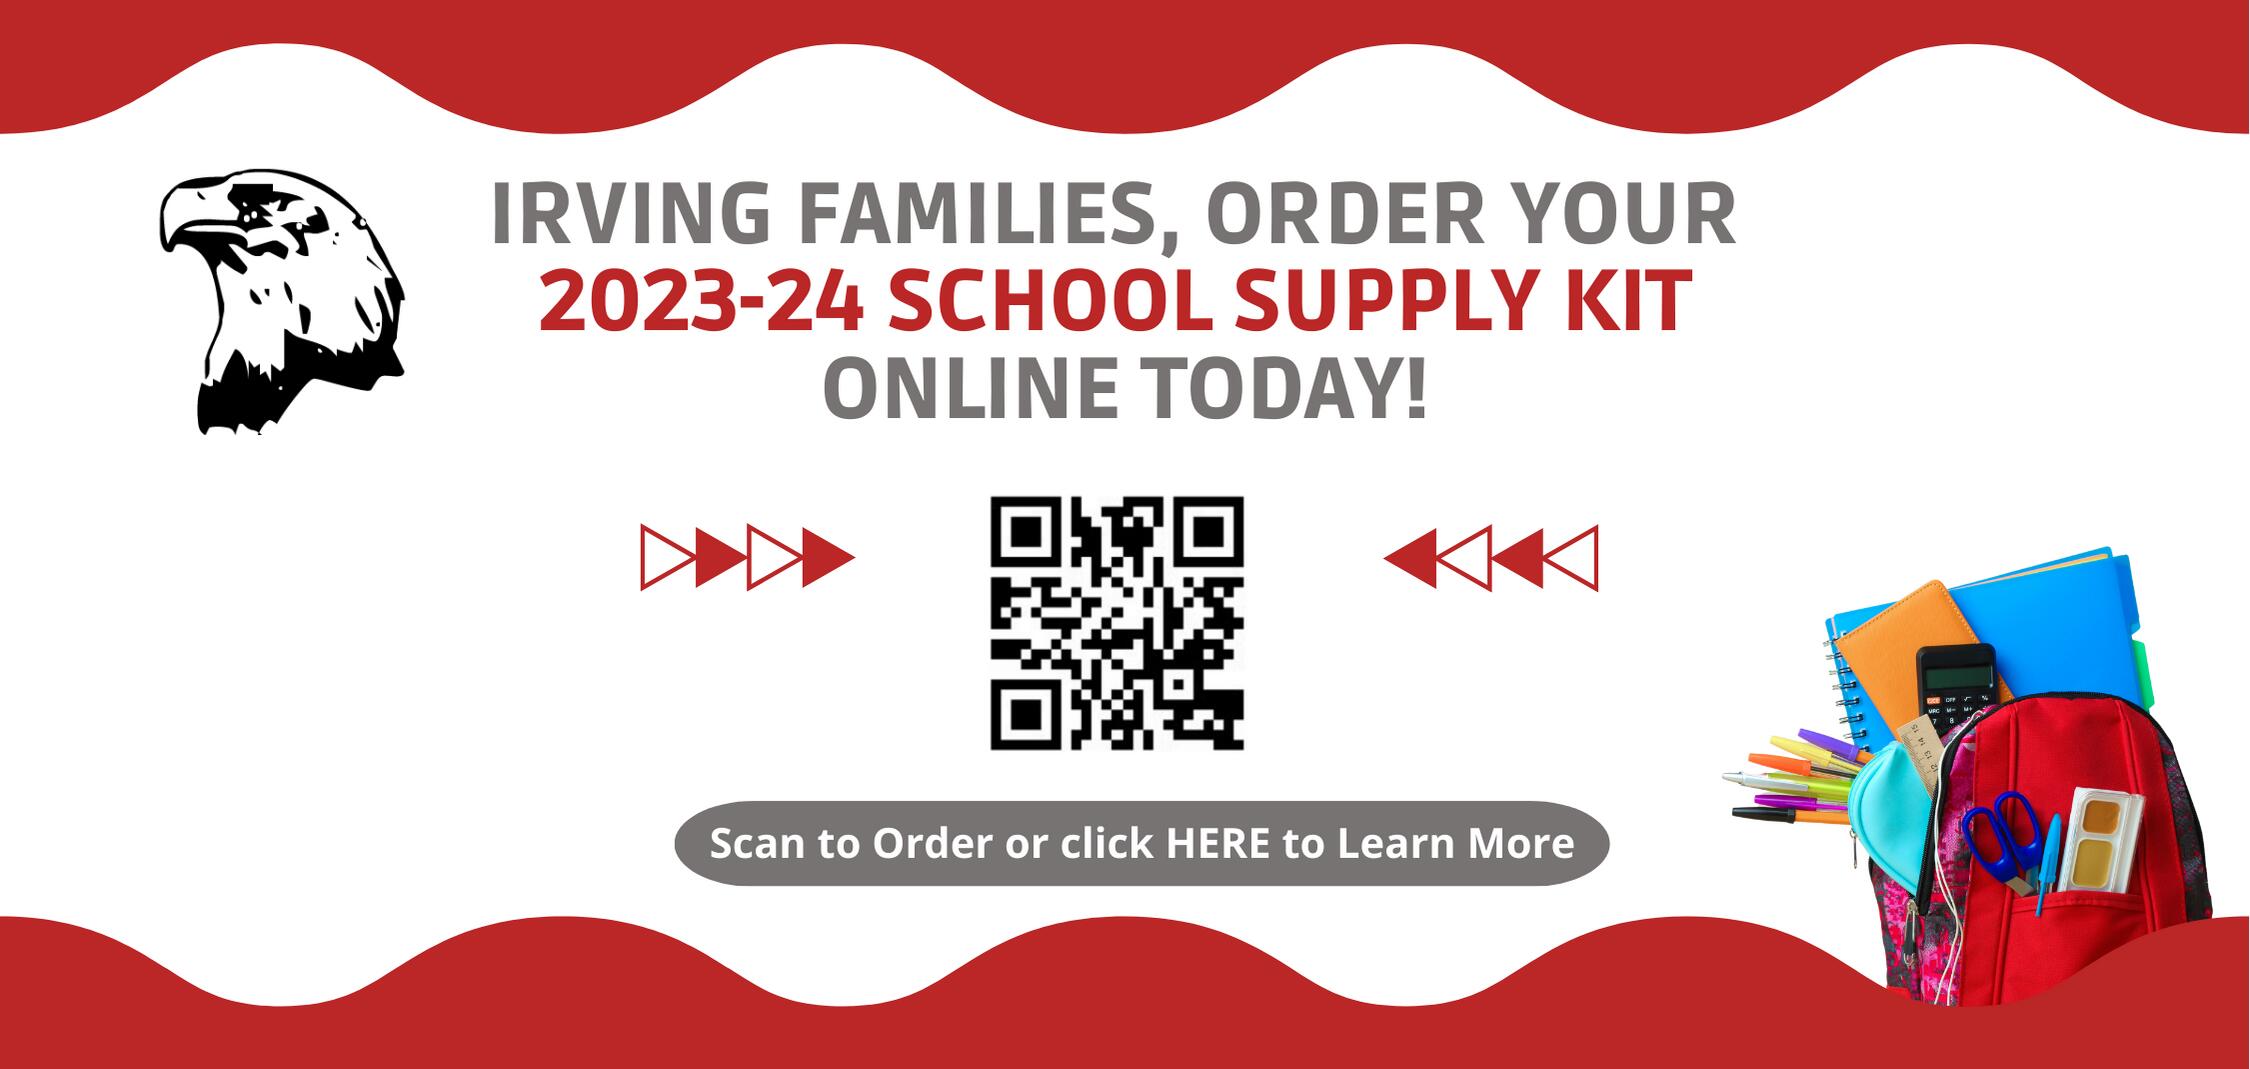 Irving families, order your 2023-24 school supply kit online today!